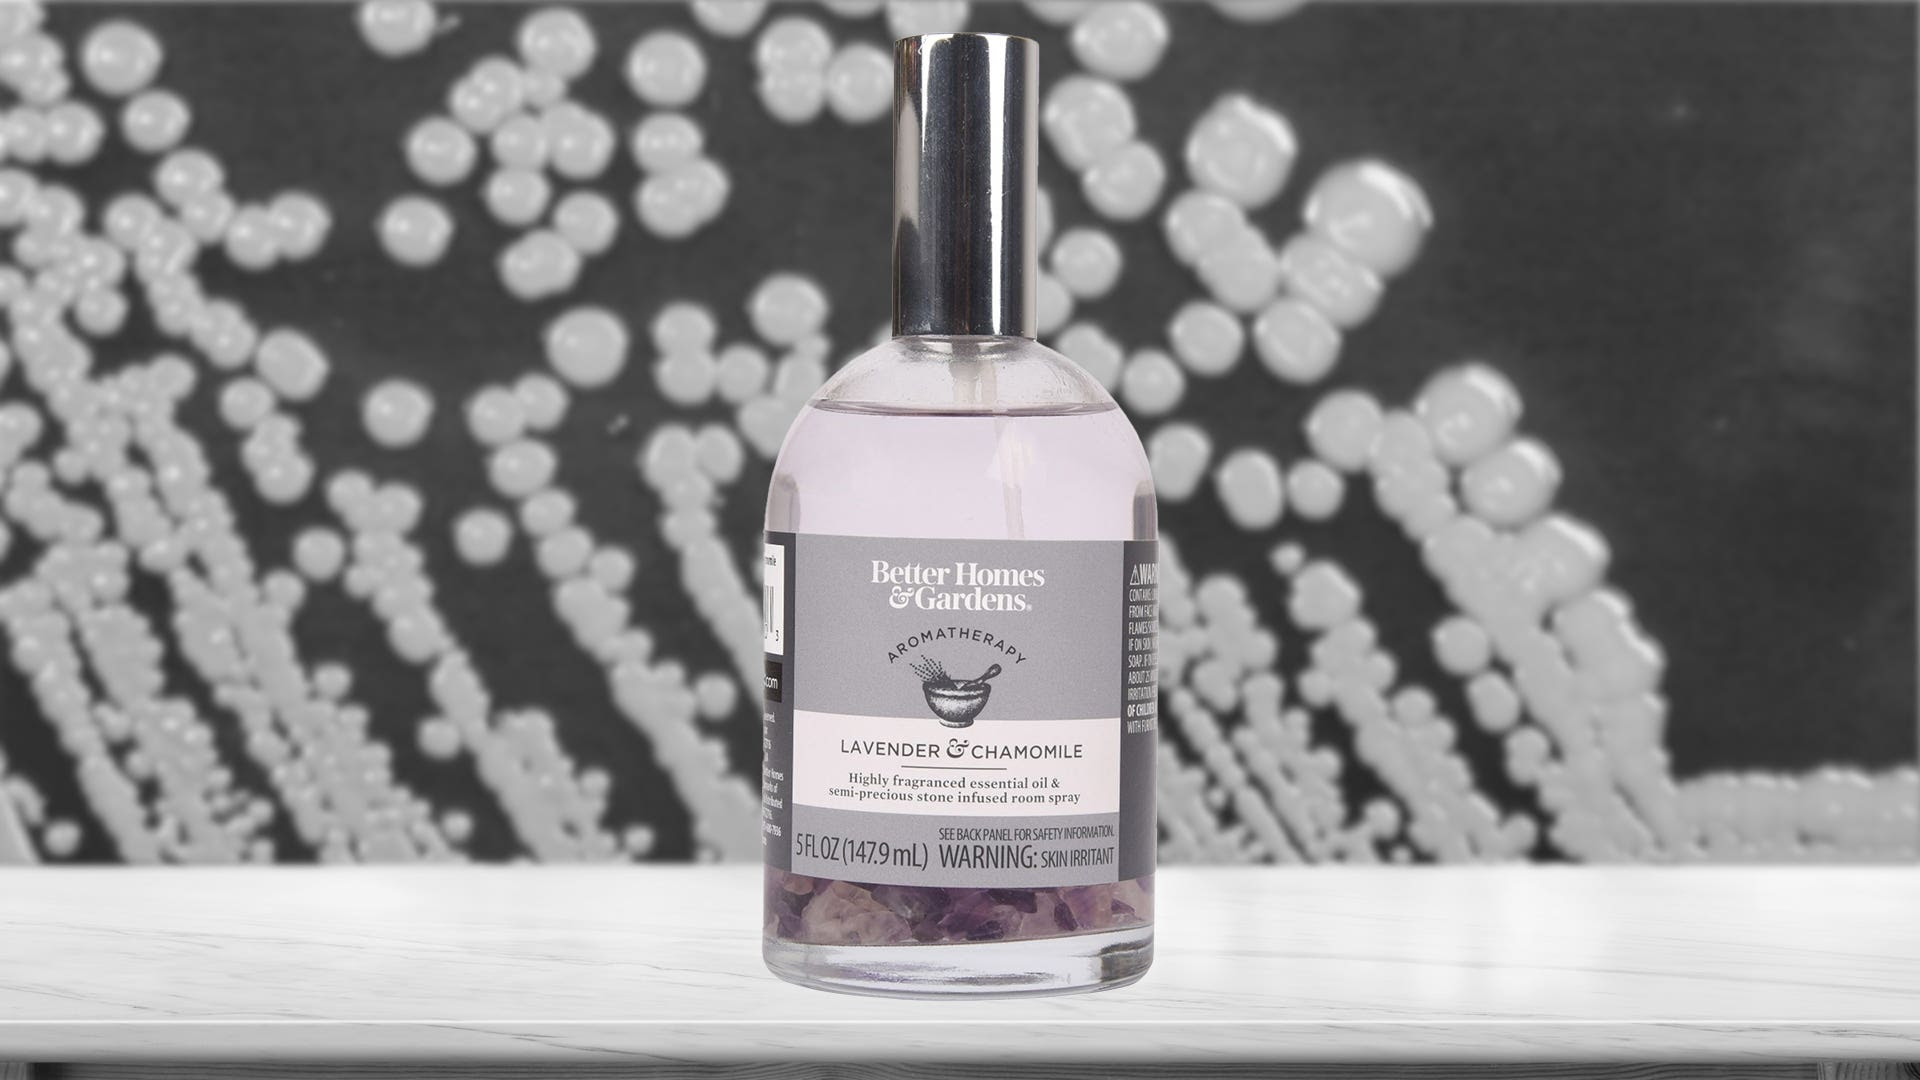 A bottle of Better Homes & Gardens Lavender & Chamomile with Gemstones over a photo of Burkholderia pseudomallei